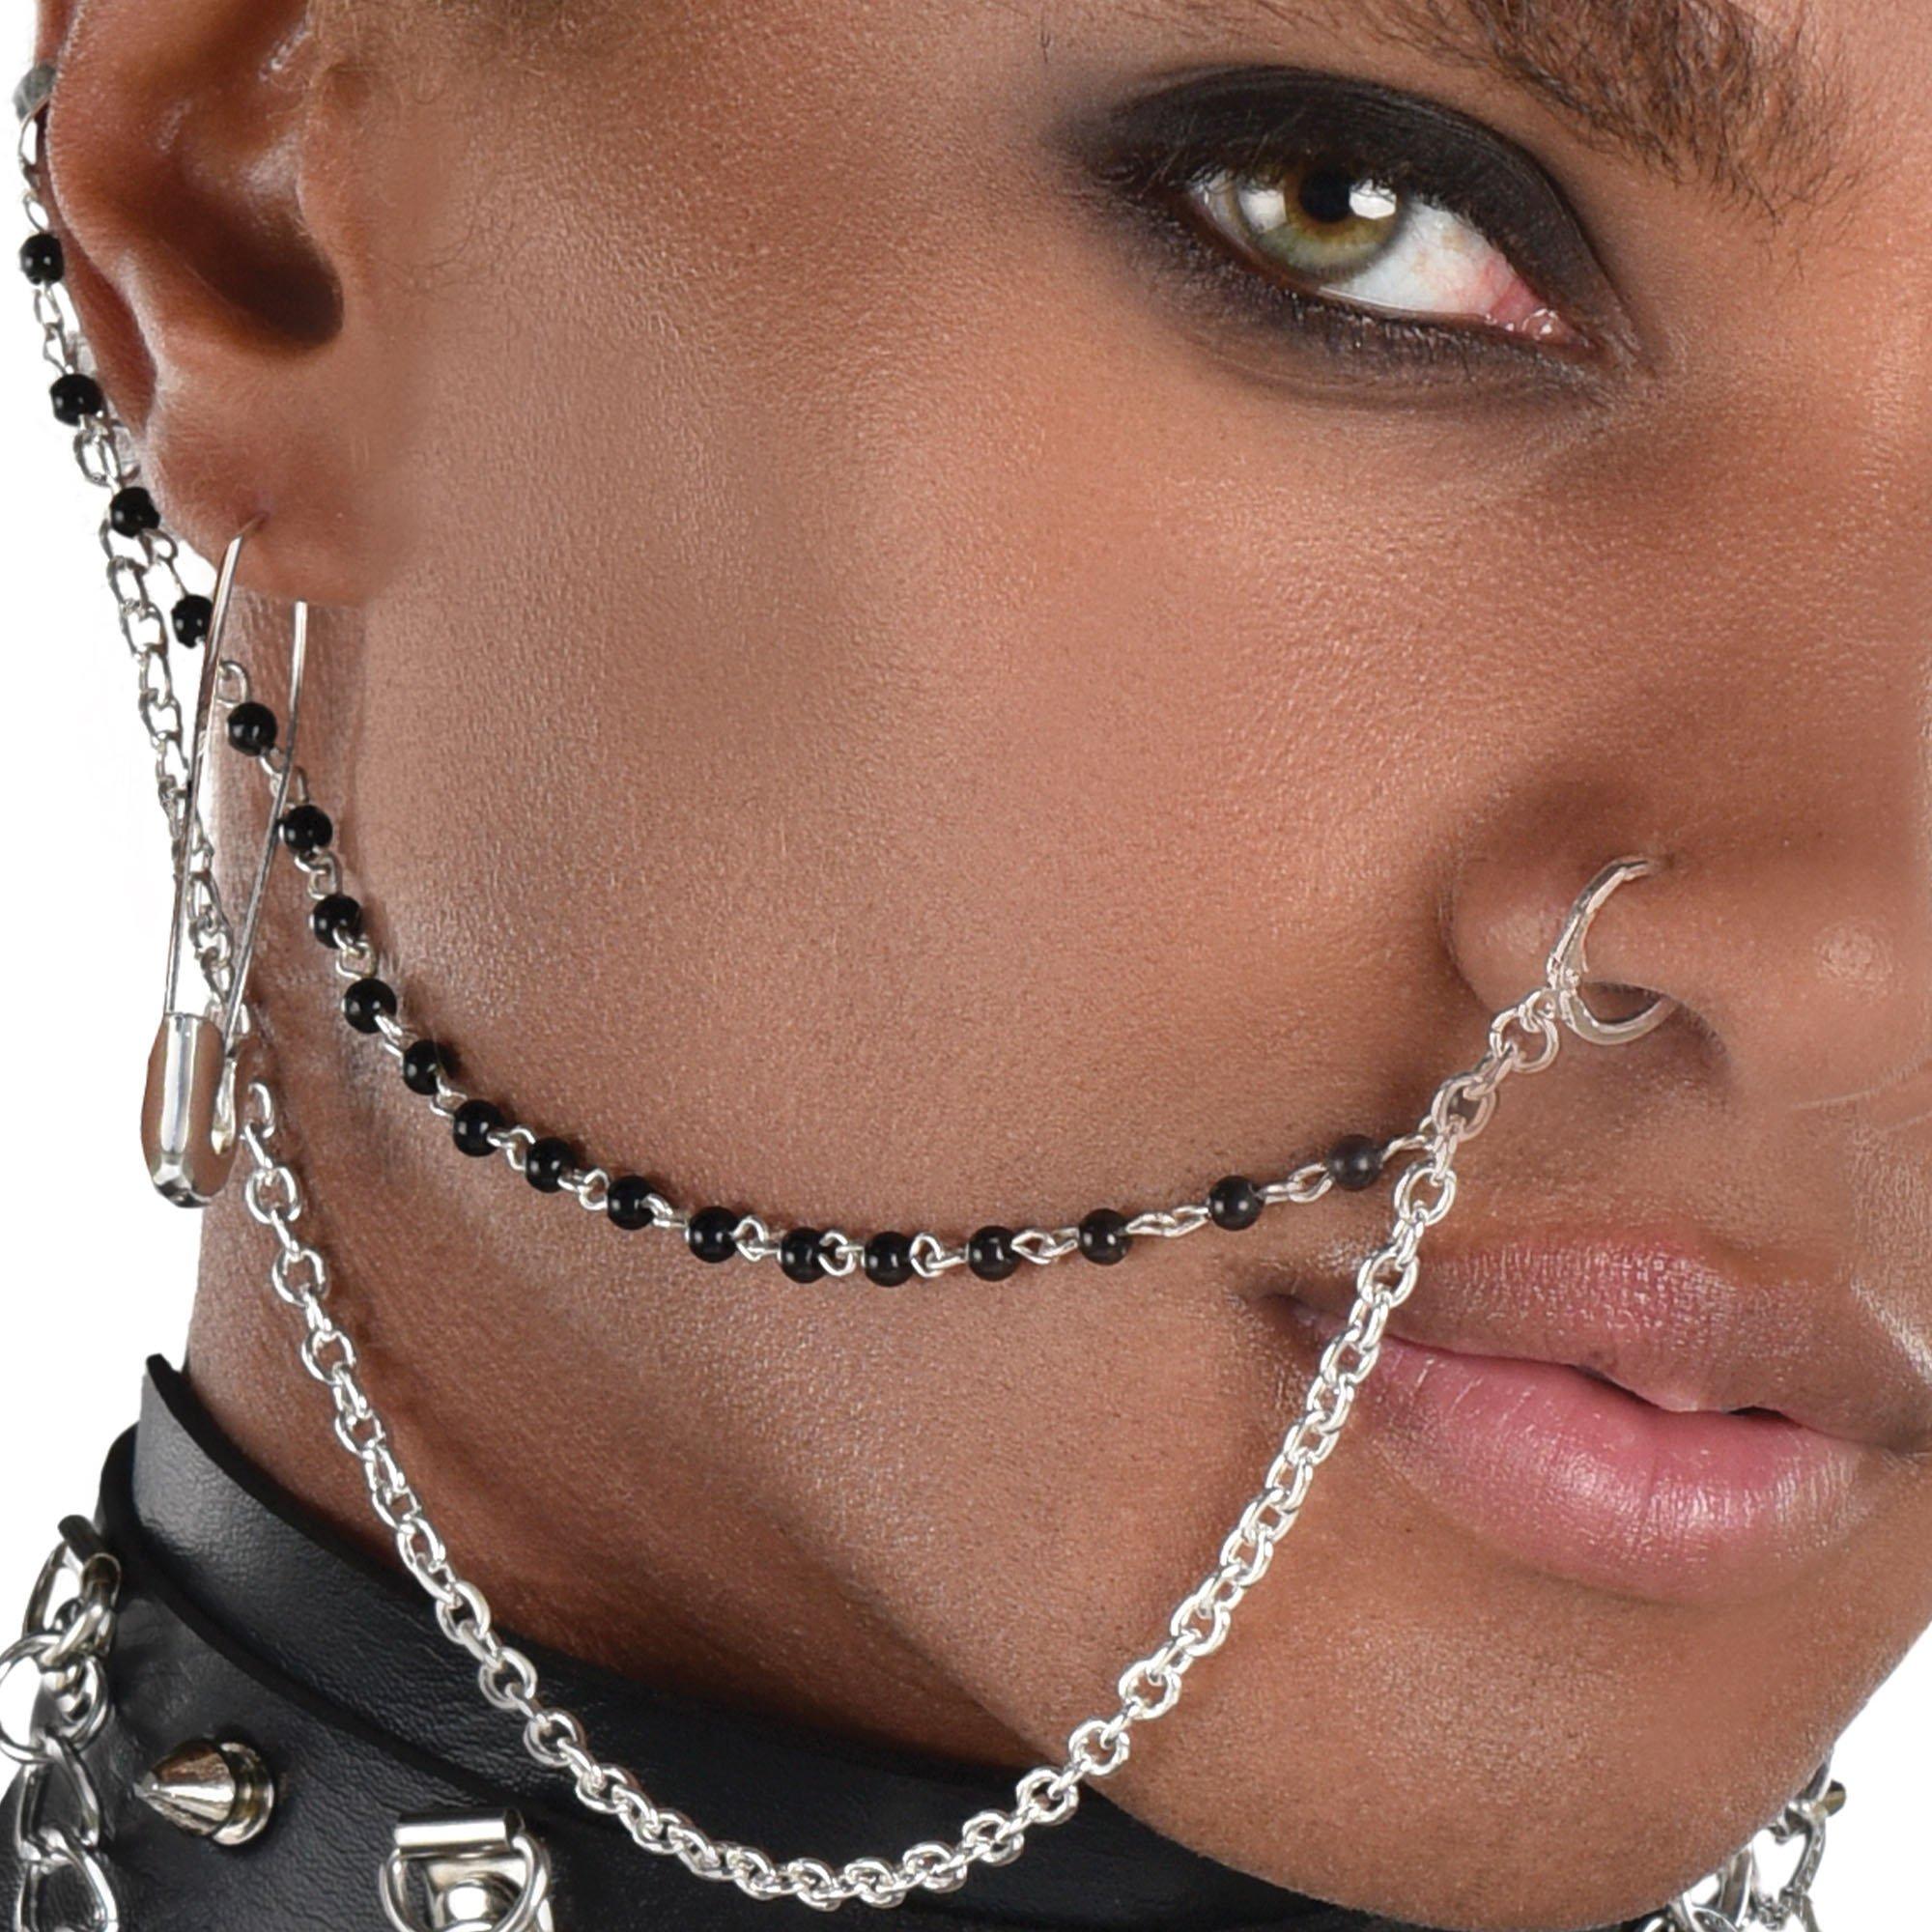 Safety Pin Earrings & Nose to Ear Chain Jewelry Set, 3pc - Punk